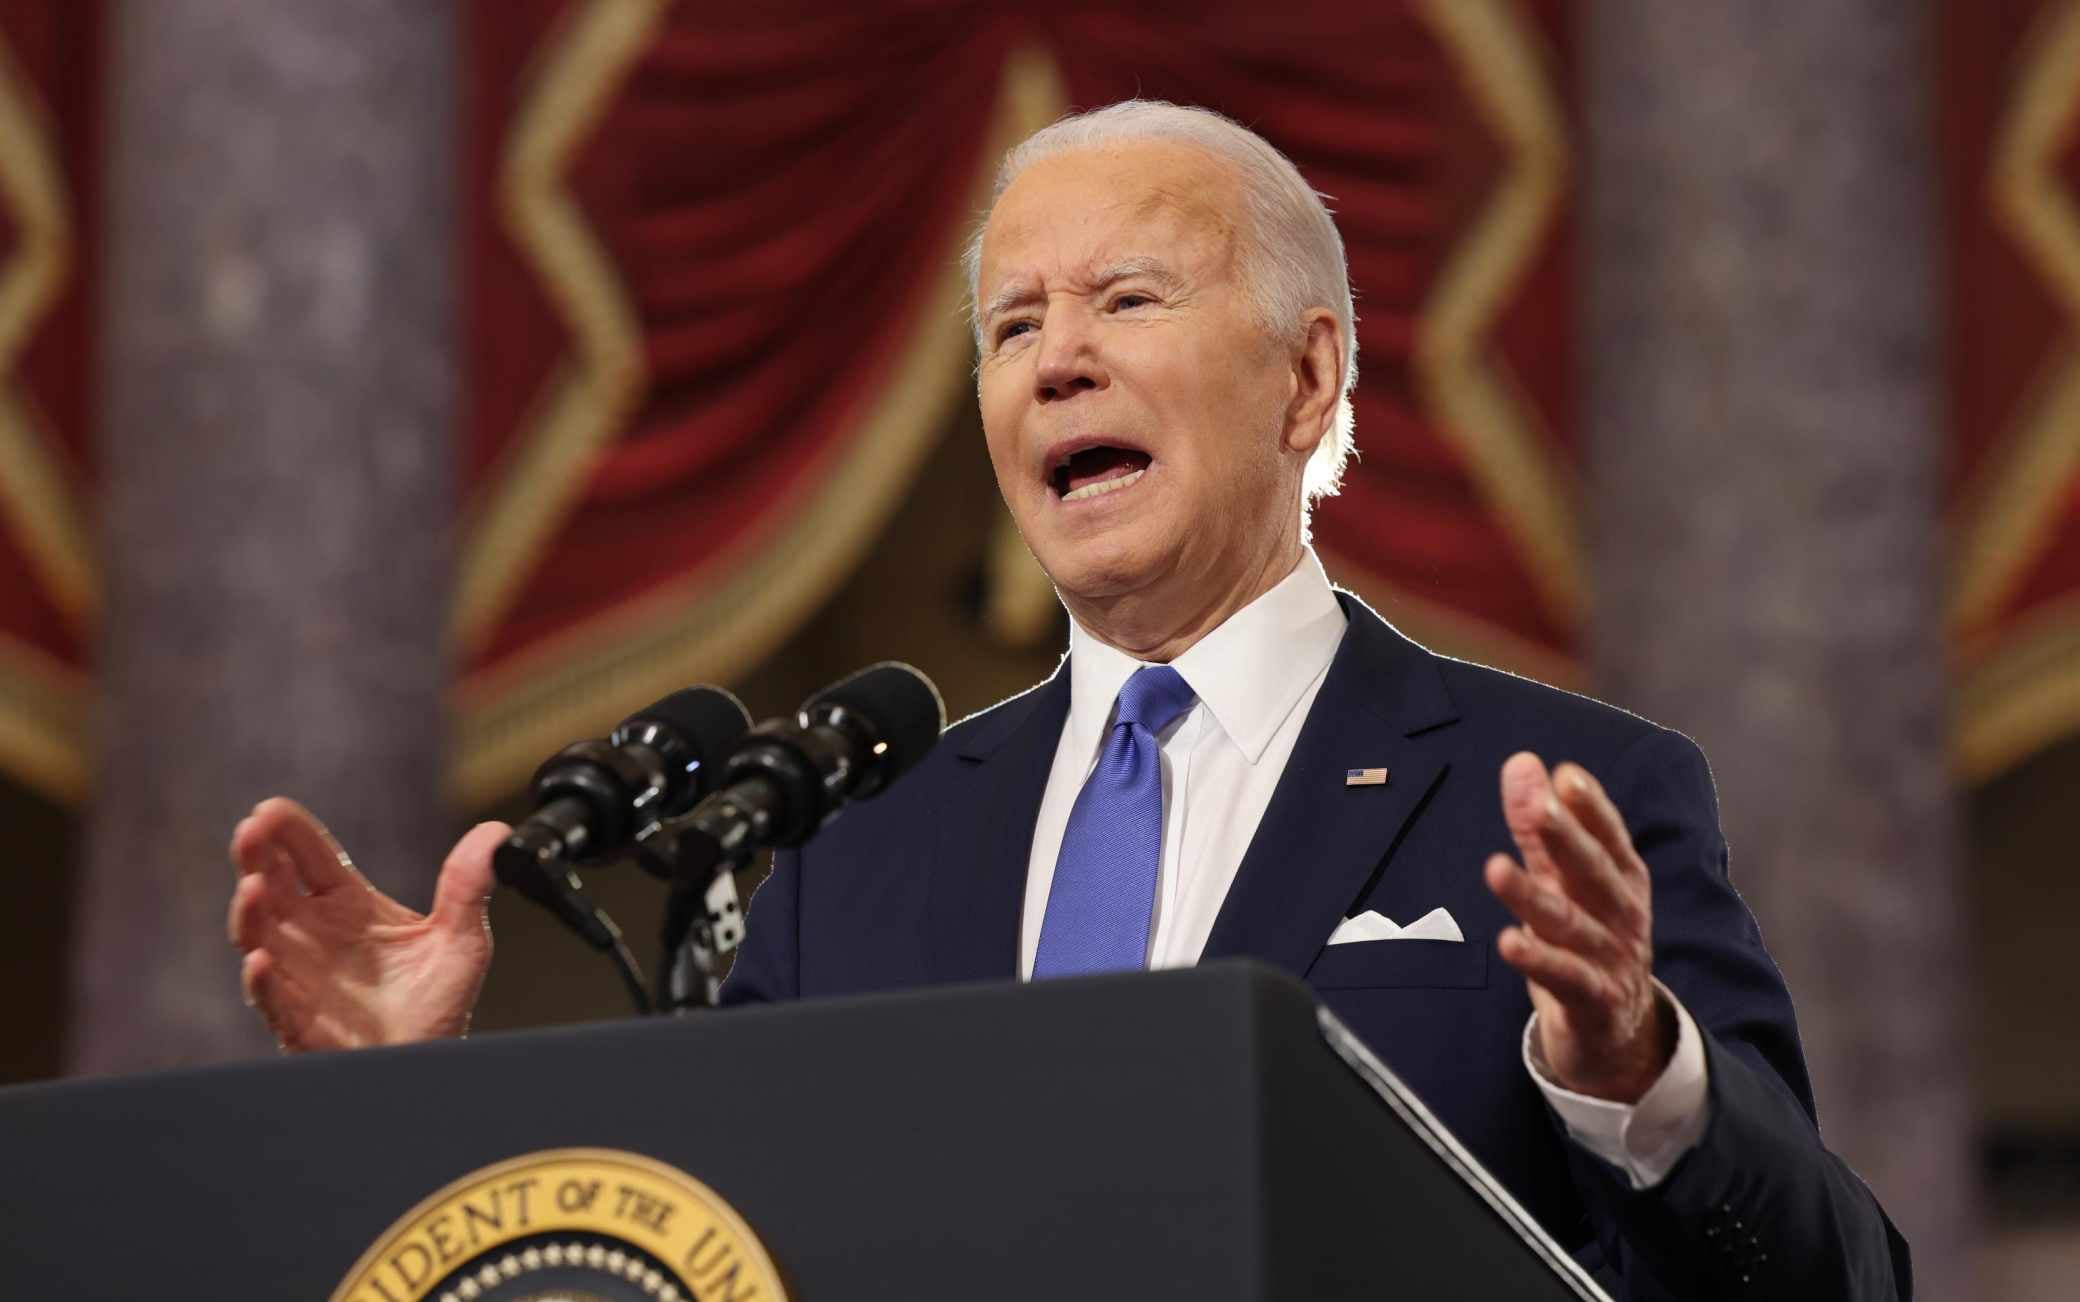 Biden: “On January 6, 2021 an armed insurrection, an attempt was made to subvert the Constitution”